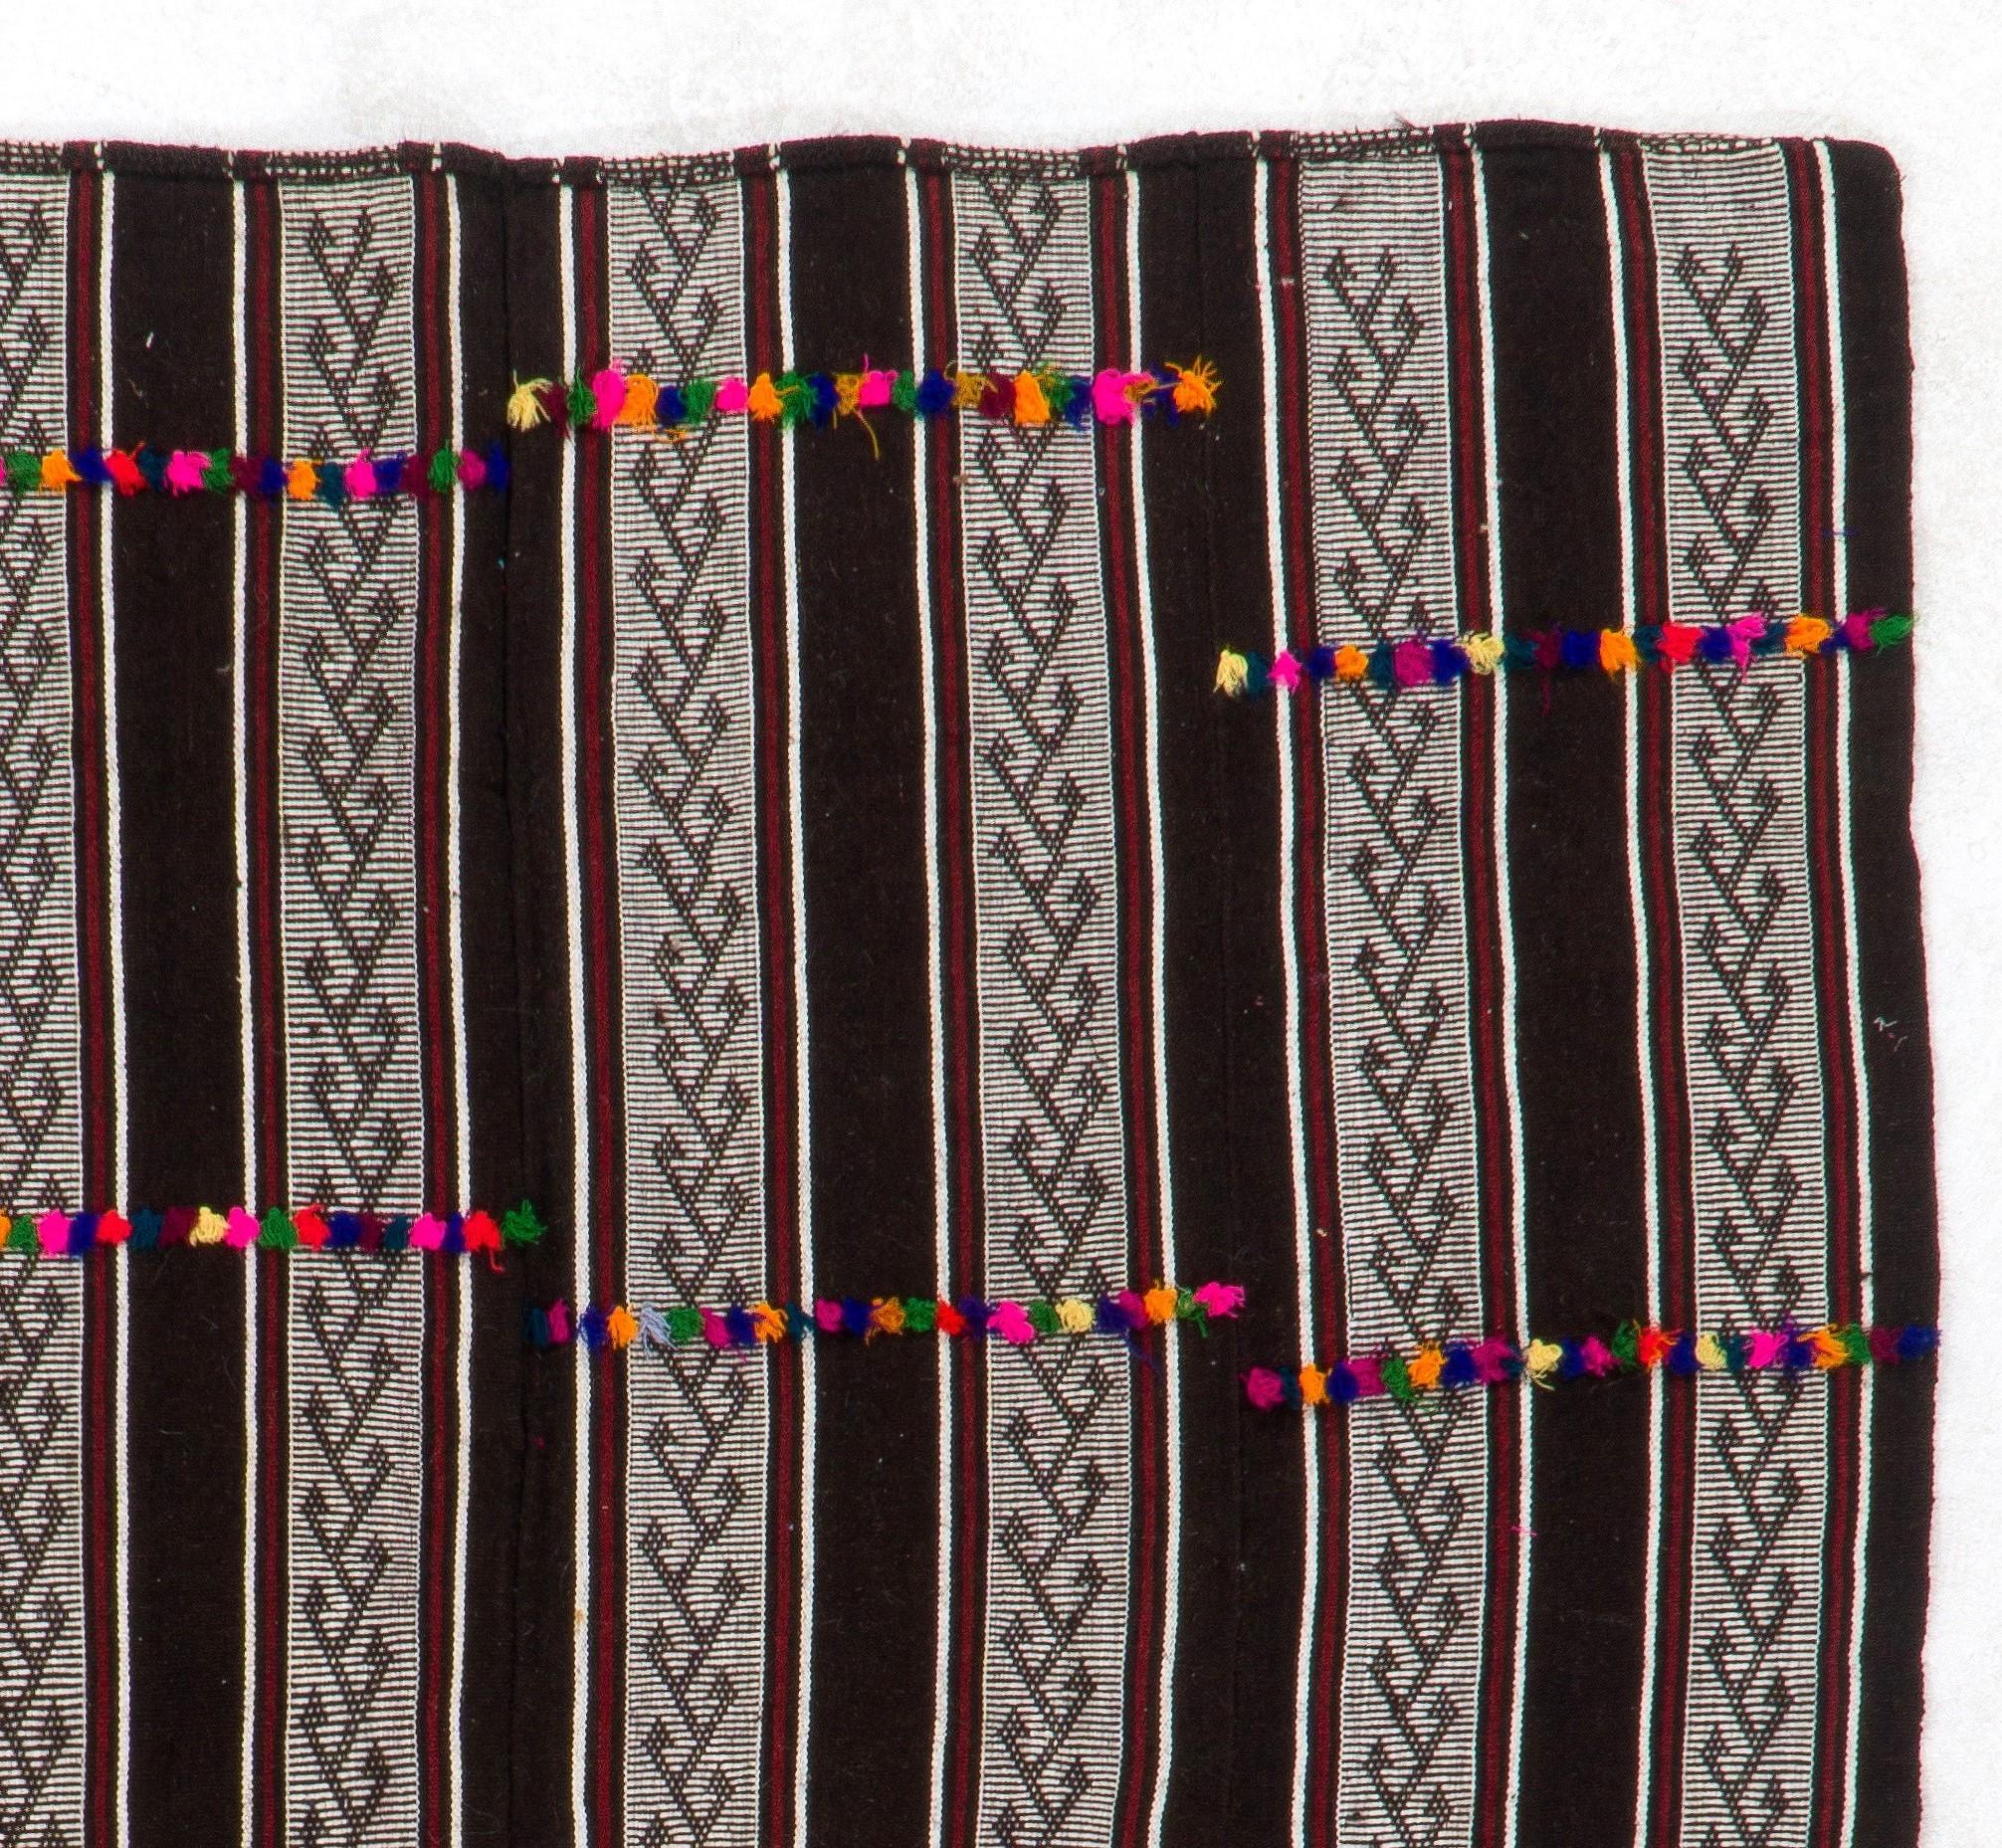 This vintage banded Turkish kilim has a simple elegance with its large stripes in the natural, earthy tones of cream and brown of goat's wool and sheep's wool that it is made of, as well as gorgeous burgundy. The delicate hook motifs all over the